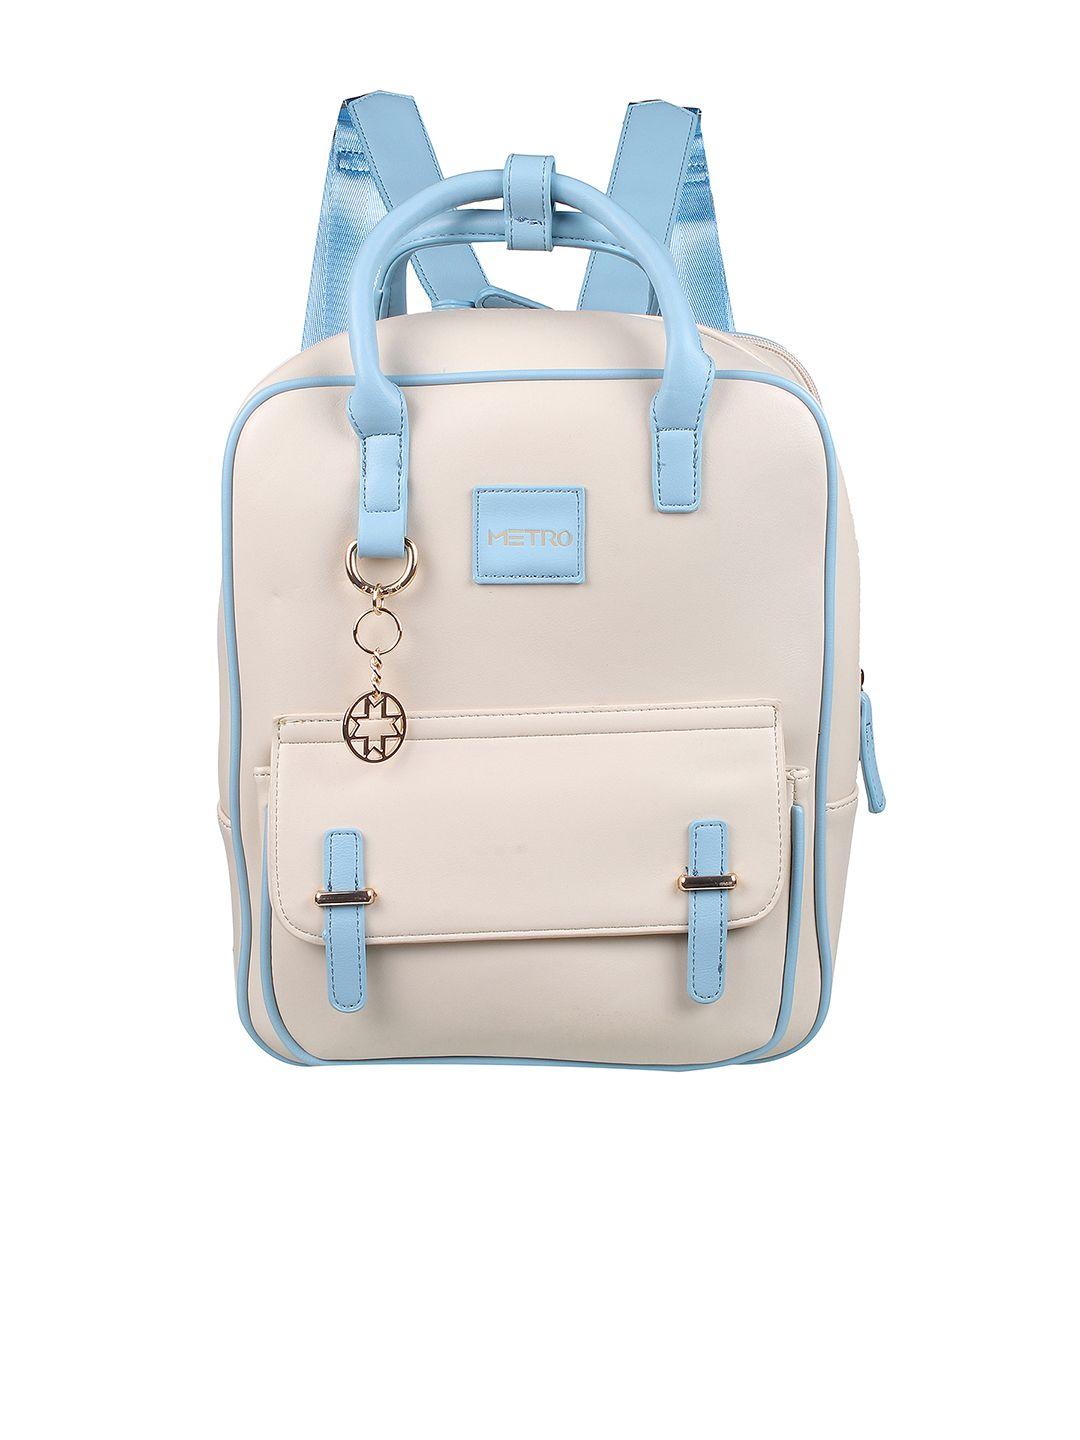 metro structured backpack